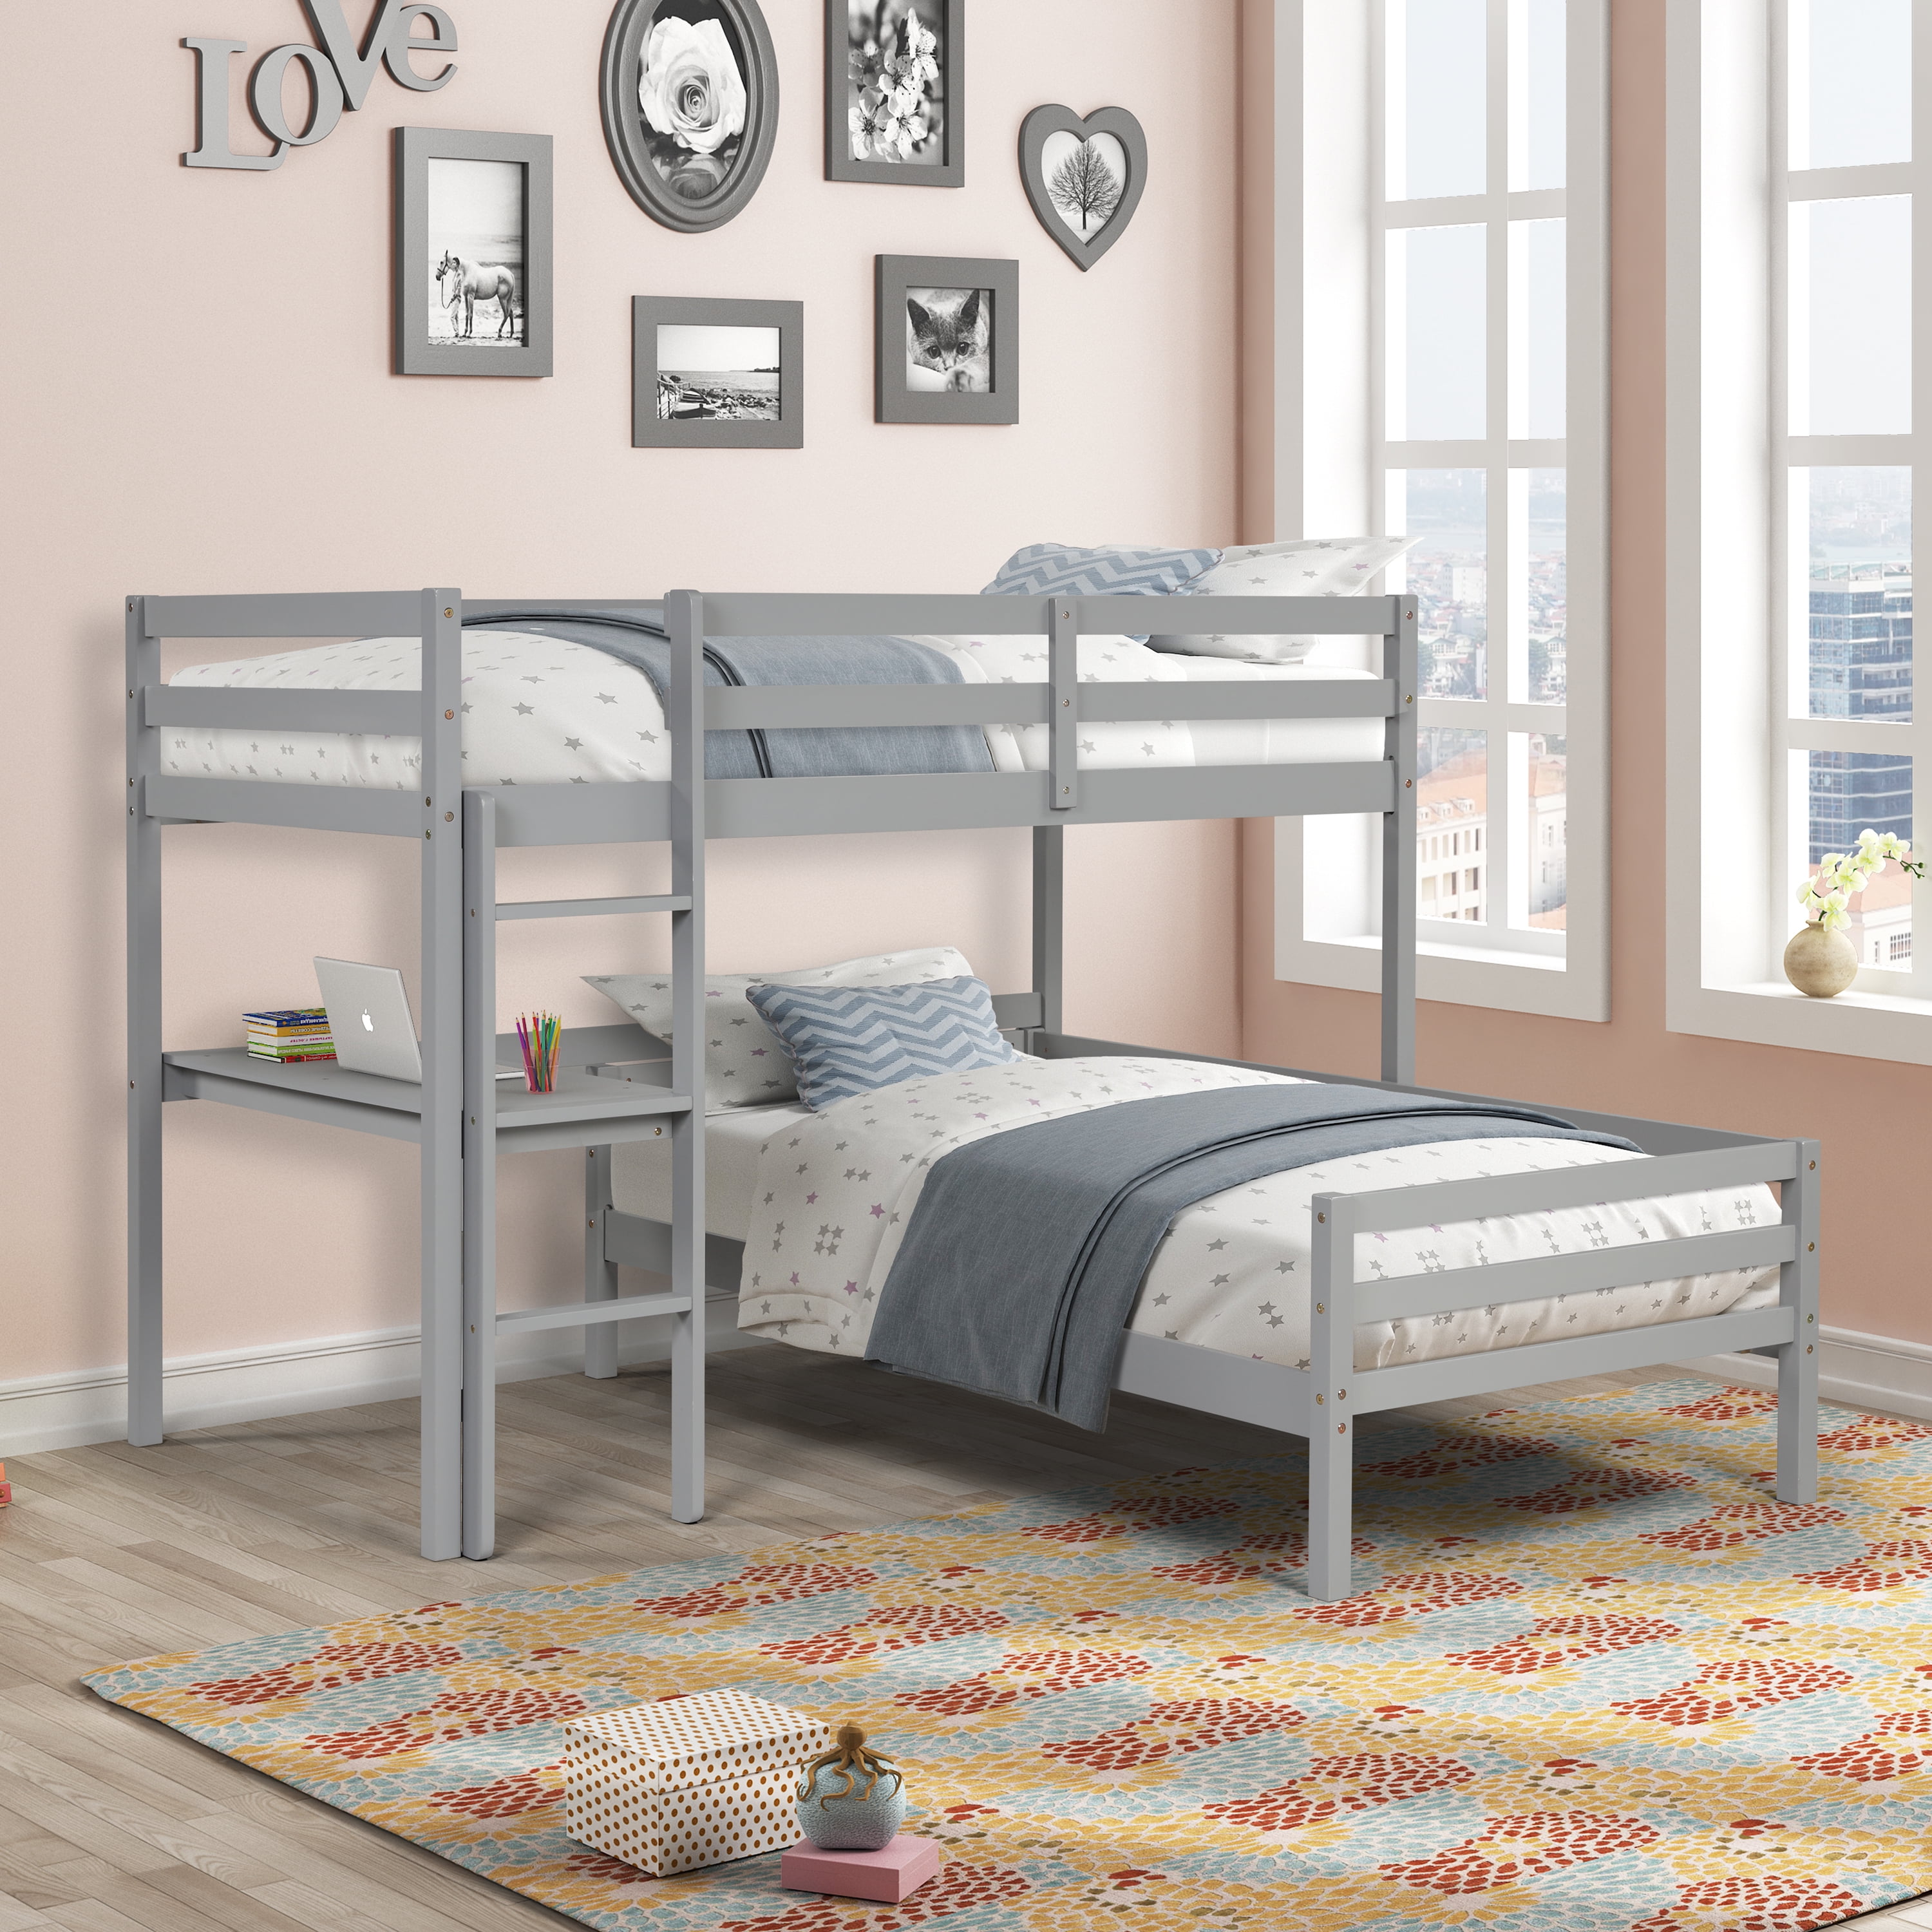 Twin Bunk Bed Solid Wood Loft, Bunk Bed Frame With Desk